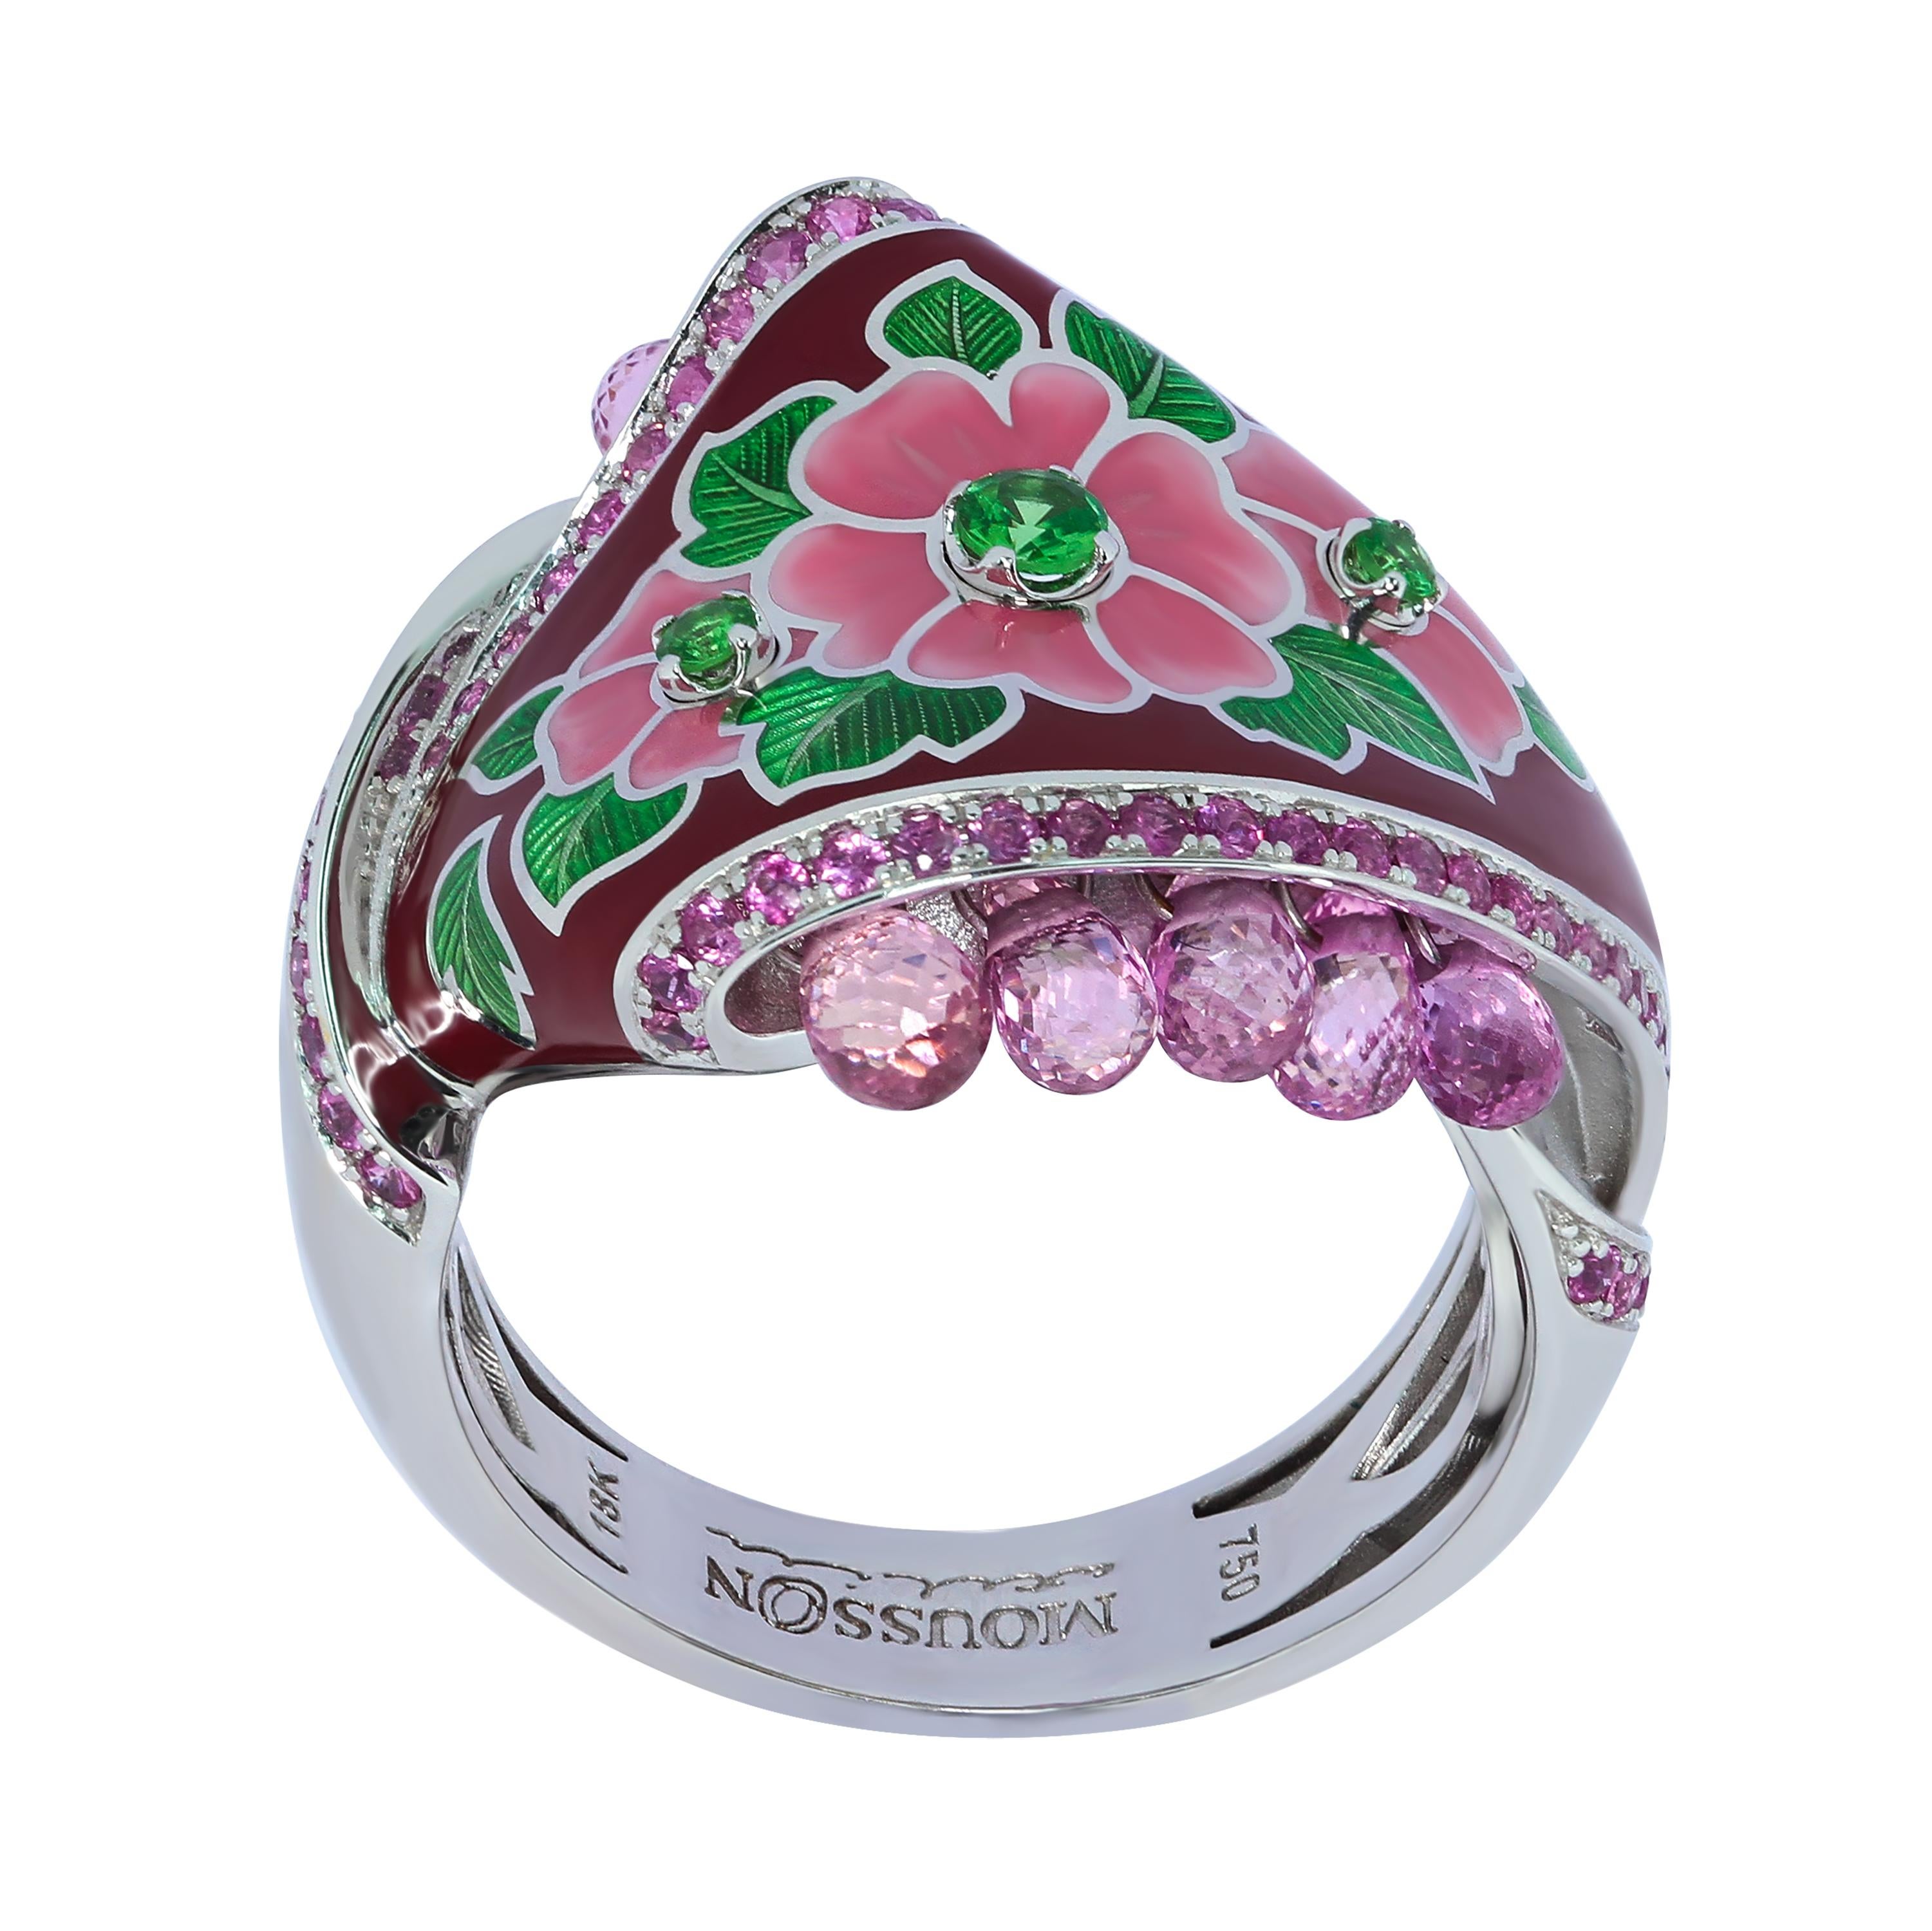 Sapphires Briolettes Tsavorites Enamel 18 Karat White Gold A'la Russe Small Ring
What do you know about Pavlovo Posad shawls? This is a large part of Russian culture, which originated in the 17th century. They are large patterned scarves, which are